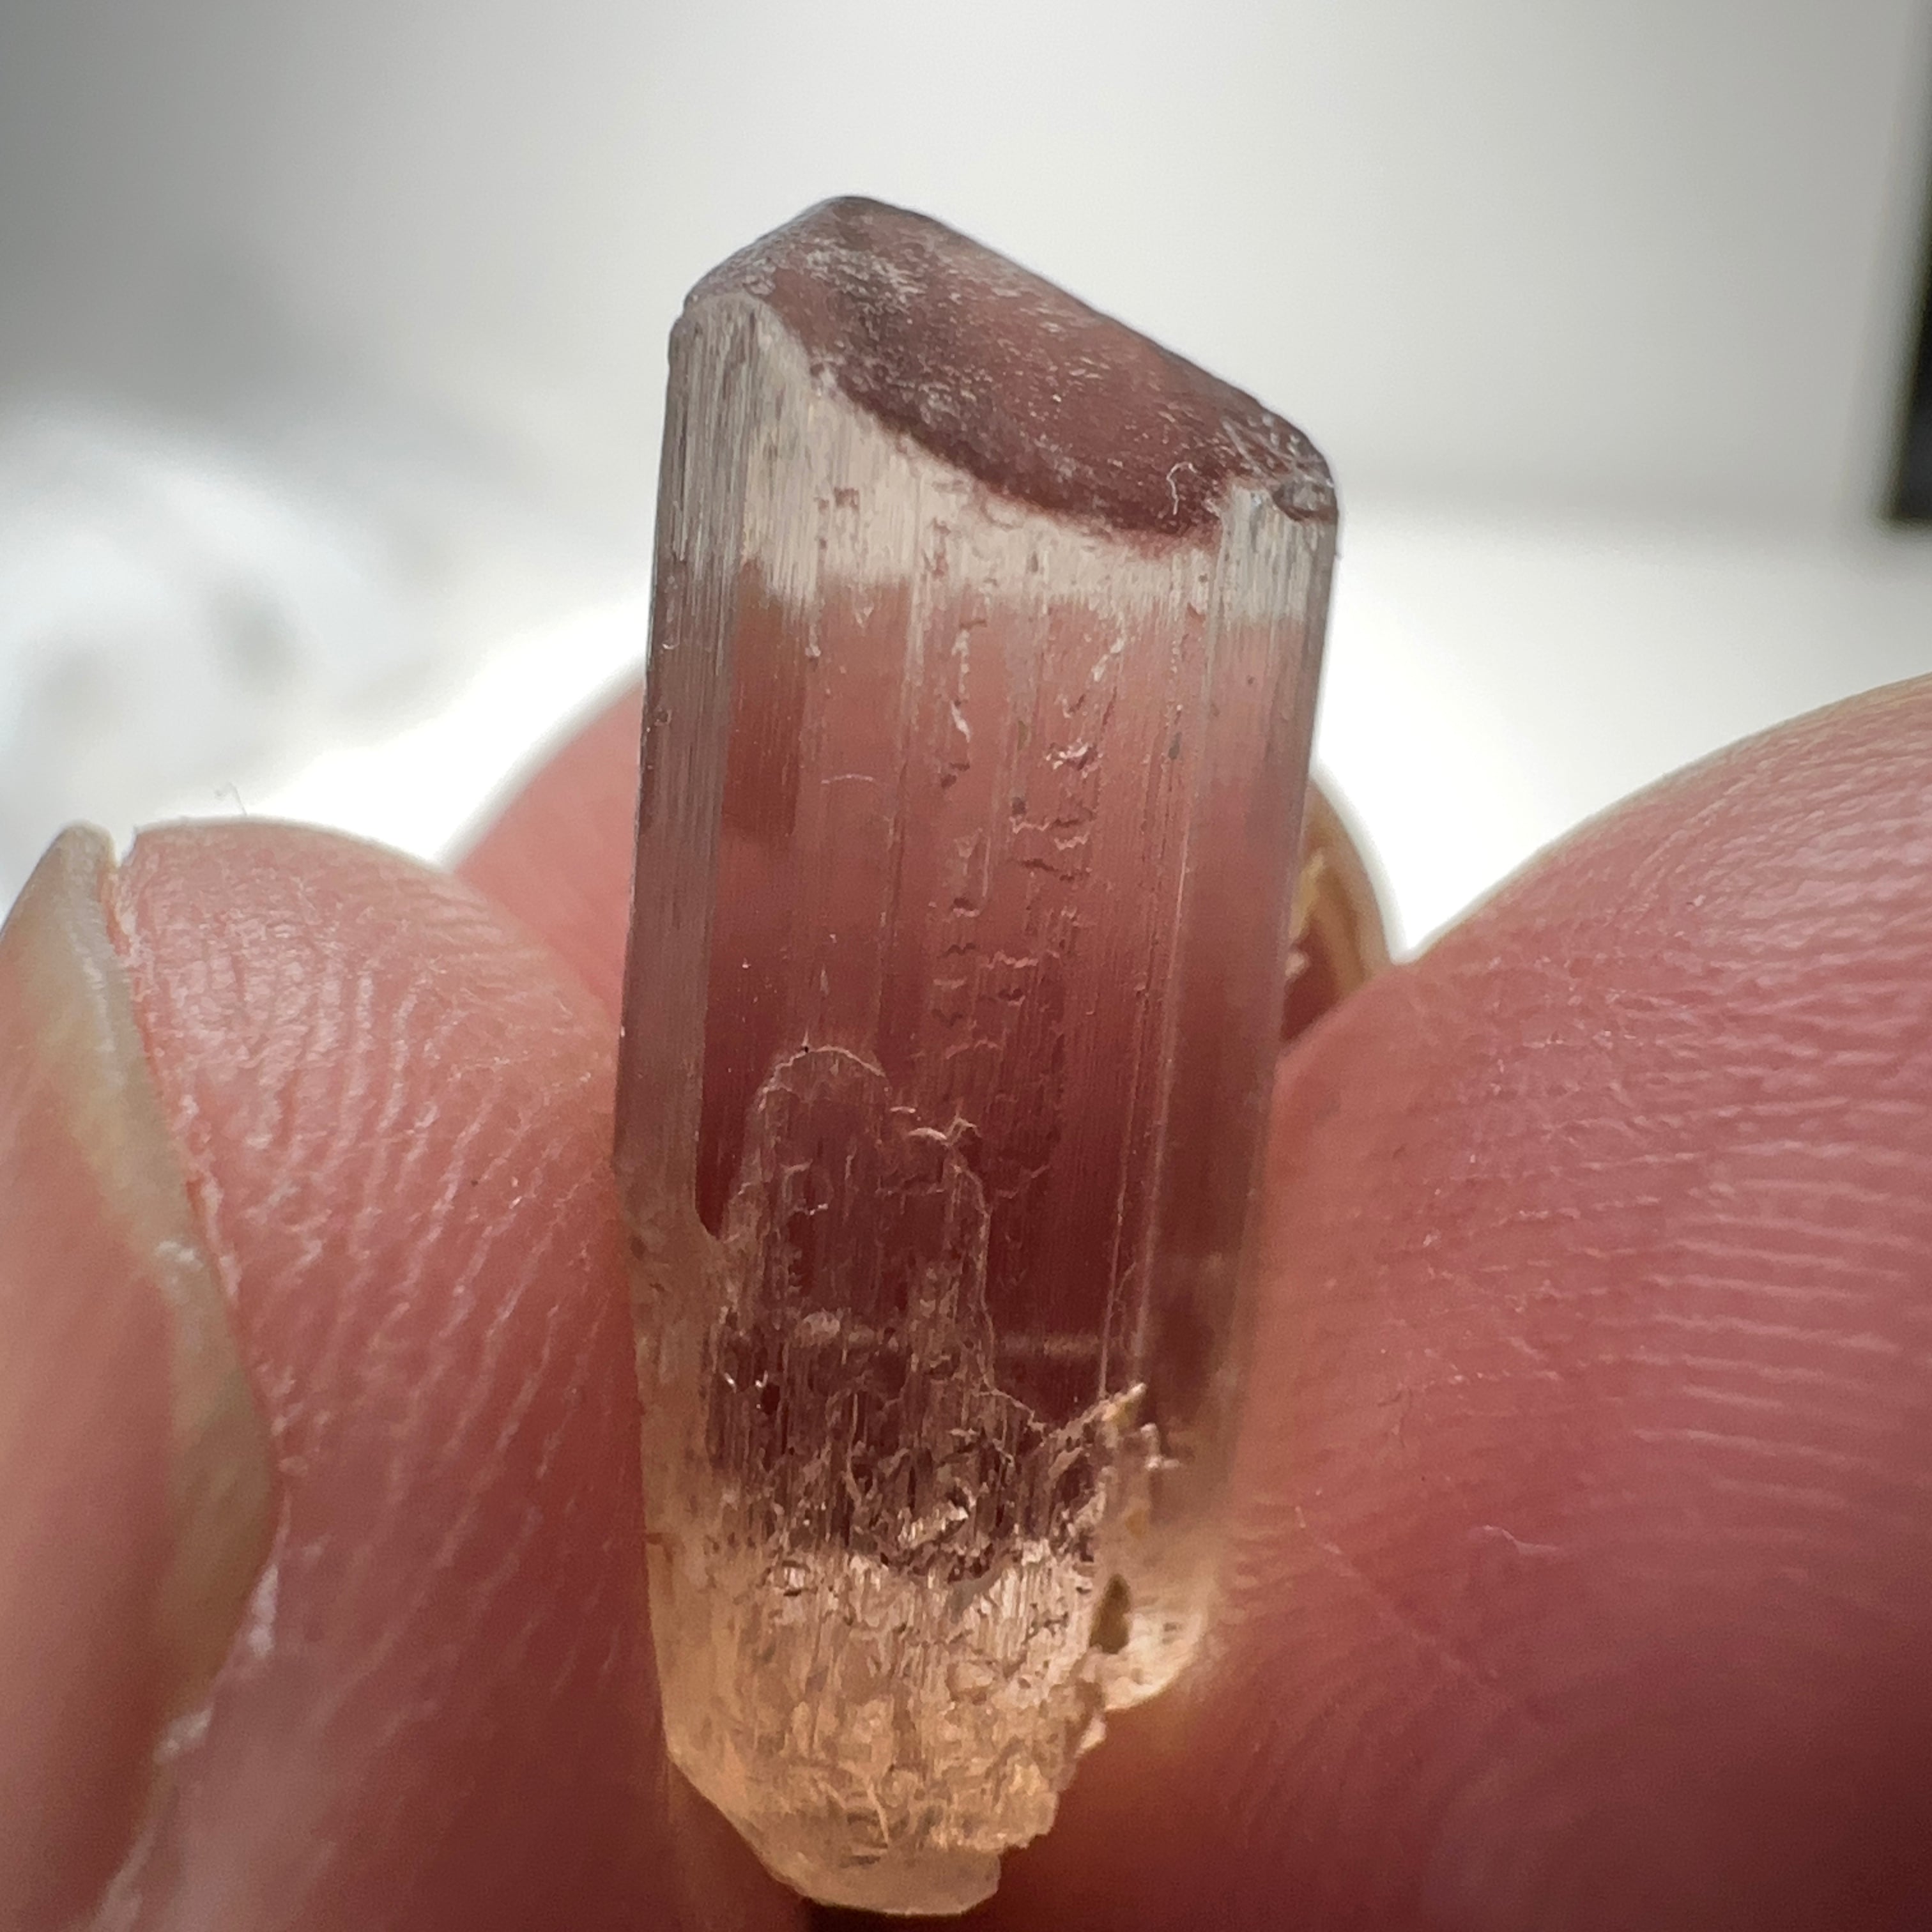 10.19ct Very Rare, Peach Pink Scapolite, Tanzania, Untreated Unheated, VVS-IF (flawless)